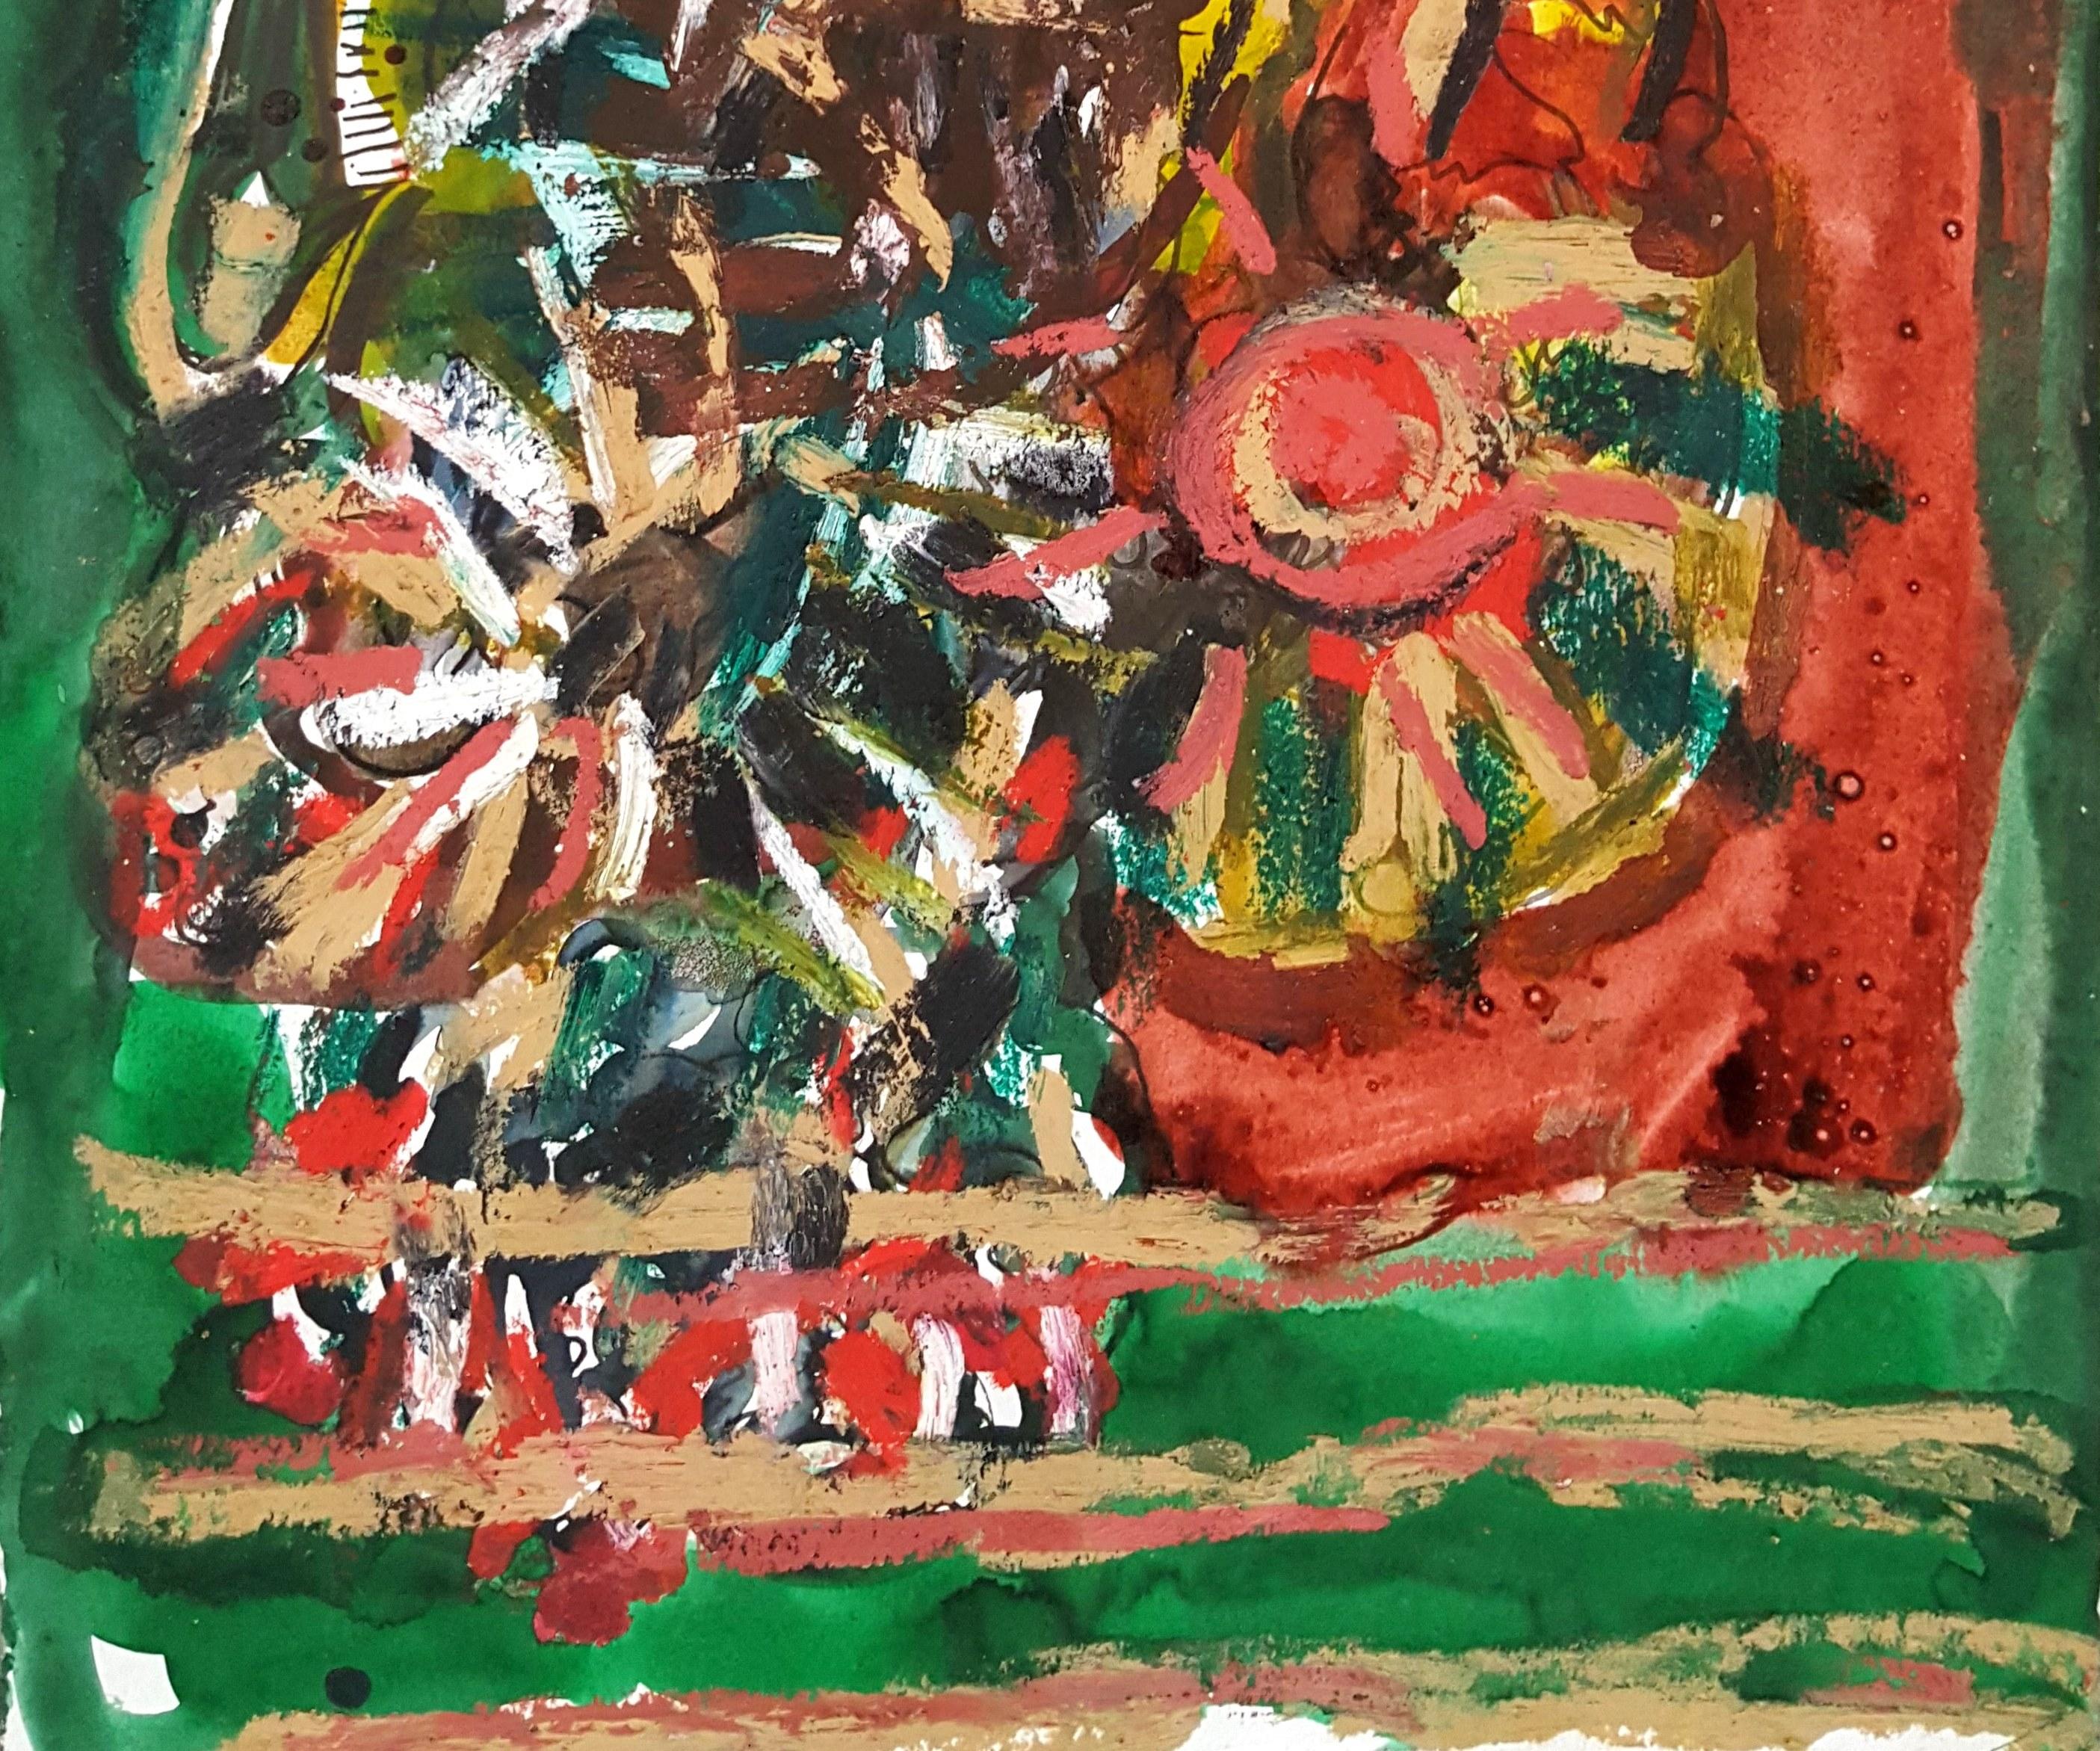 Coloured inks and pastel on paper
Signed
Gestural abstraction
Outsider art

Artist’s statement : 
